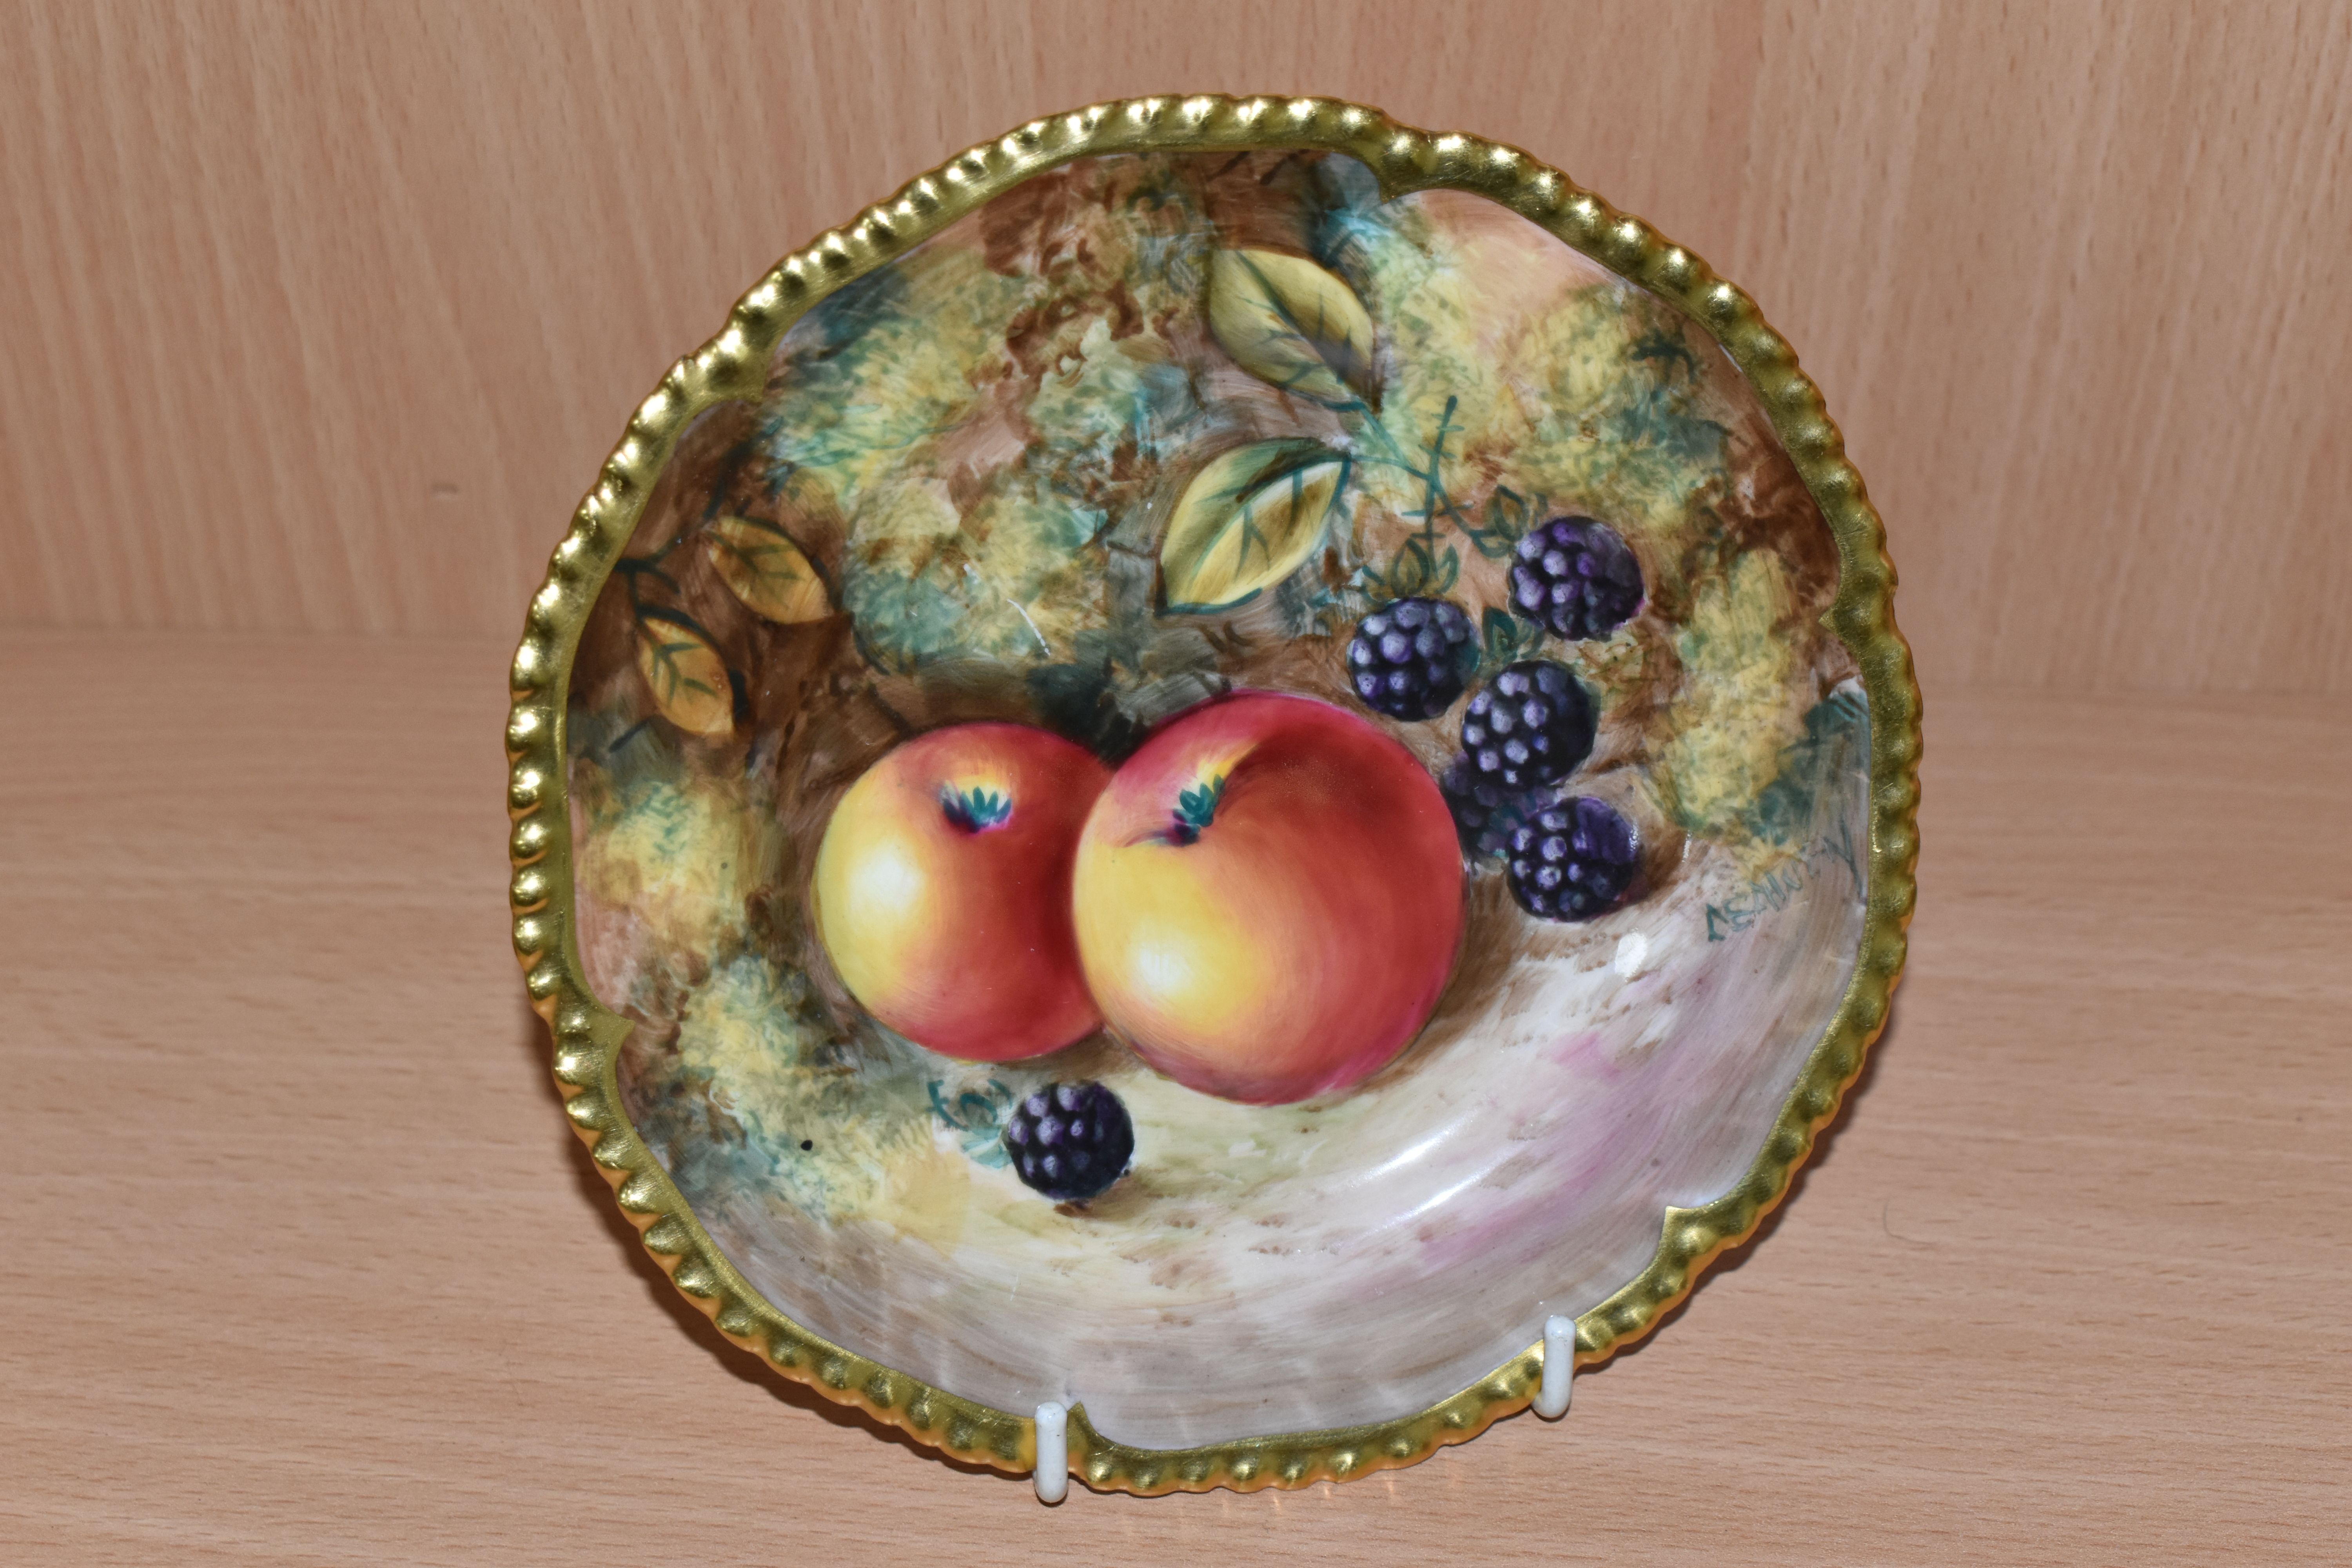 A ROYAL WORCESTER FALLEN FRUIT HAND PAINTED TEA PLATE, painted with fallen apples and blackberries